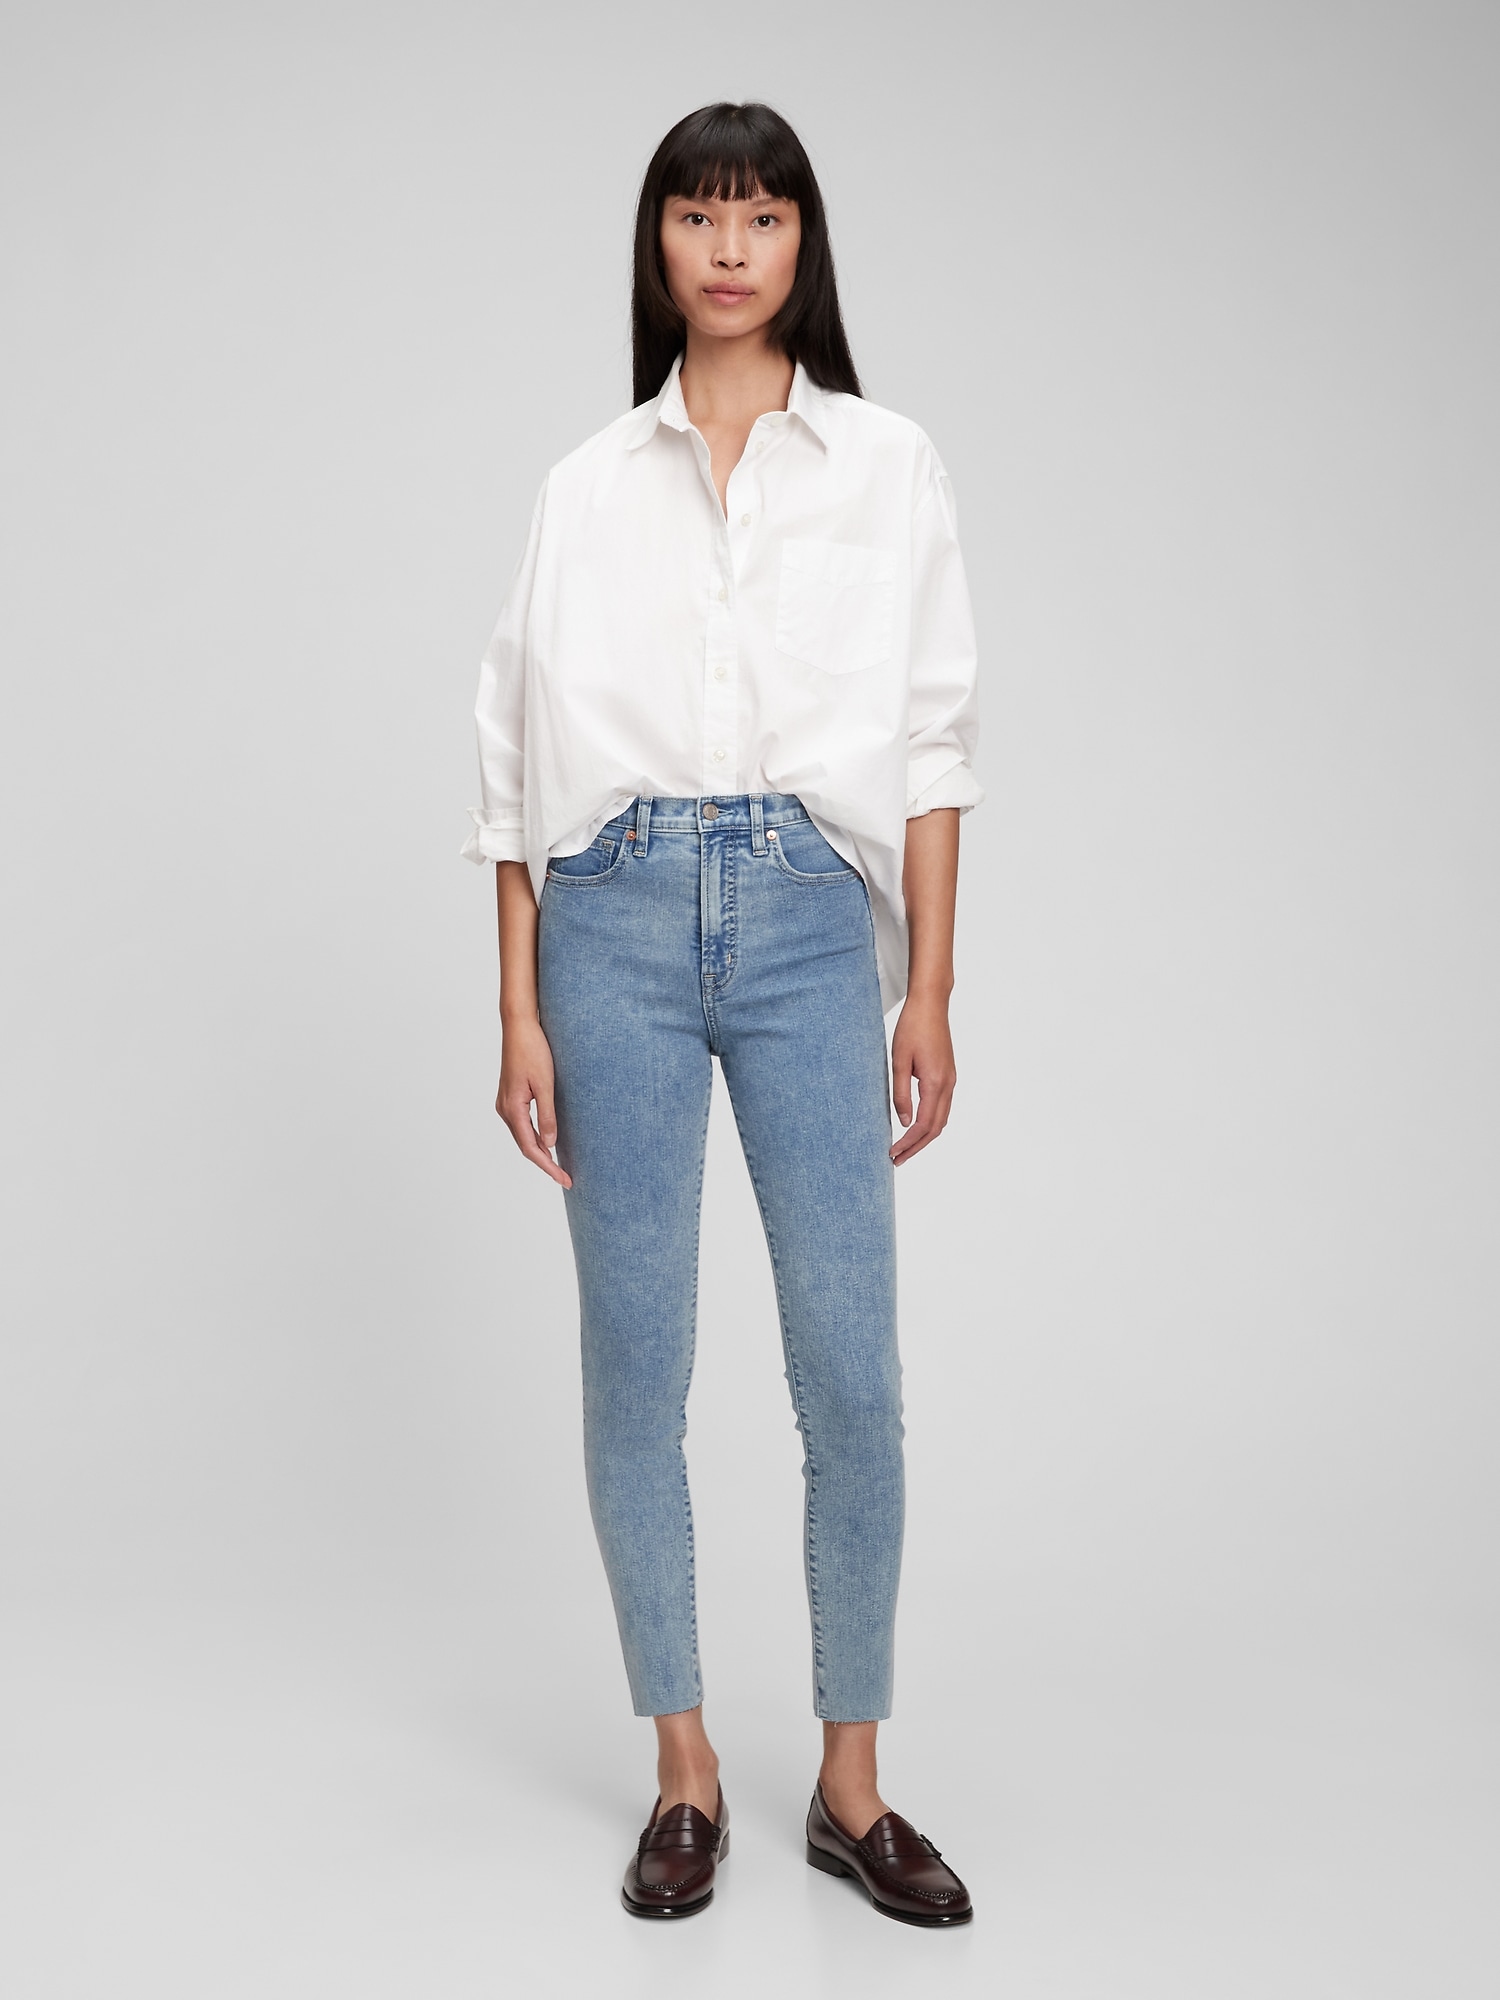 Gap Sky High Rise True Skinny Jeans with Washwell